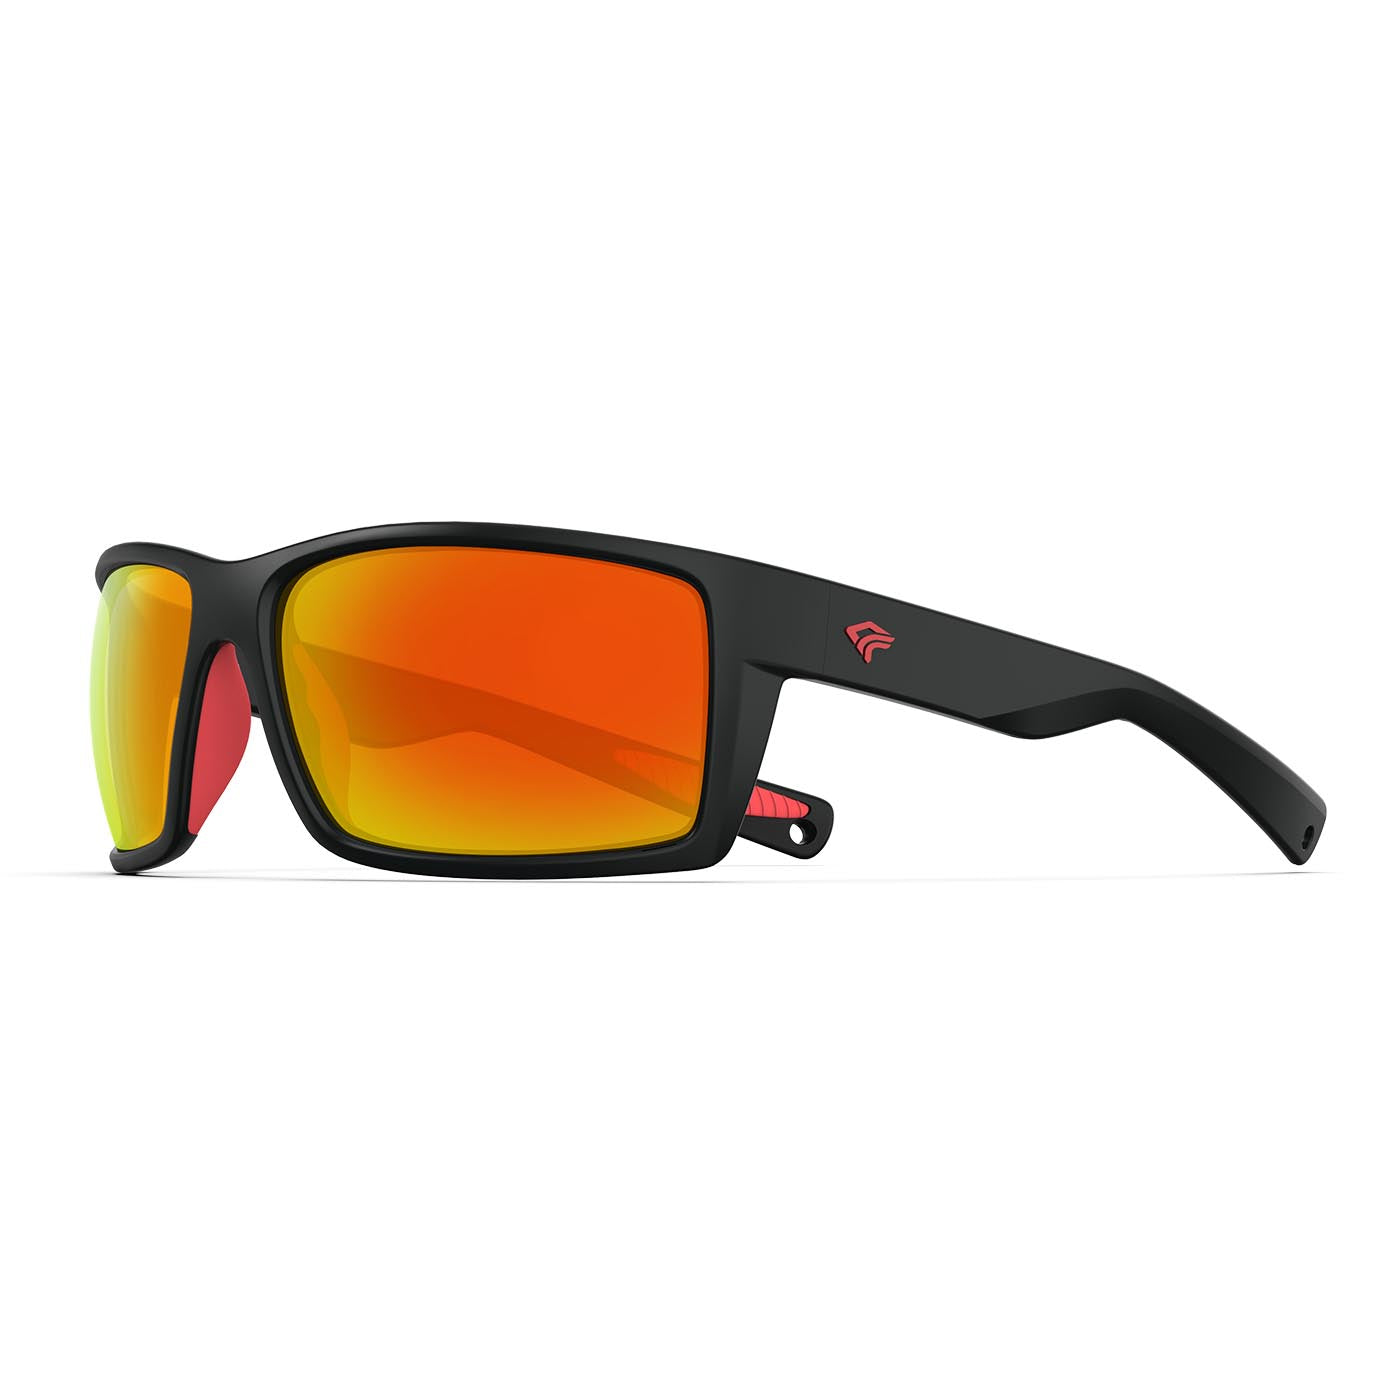 Tension Polarized Sports Sunglasses for Men and Women With